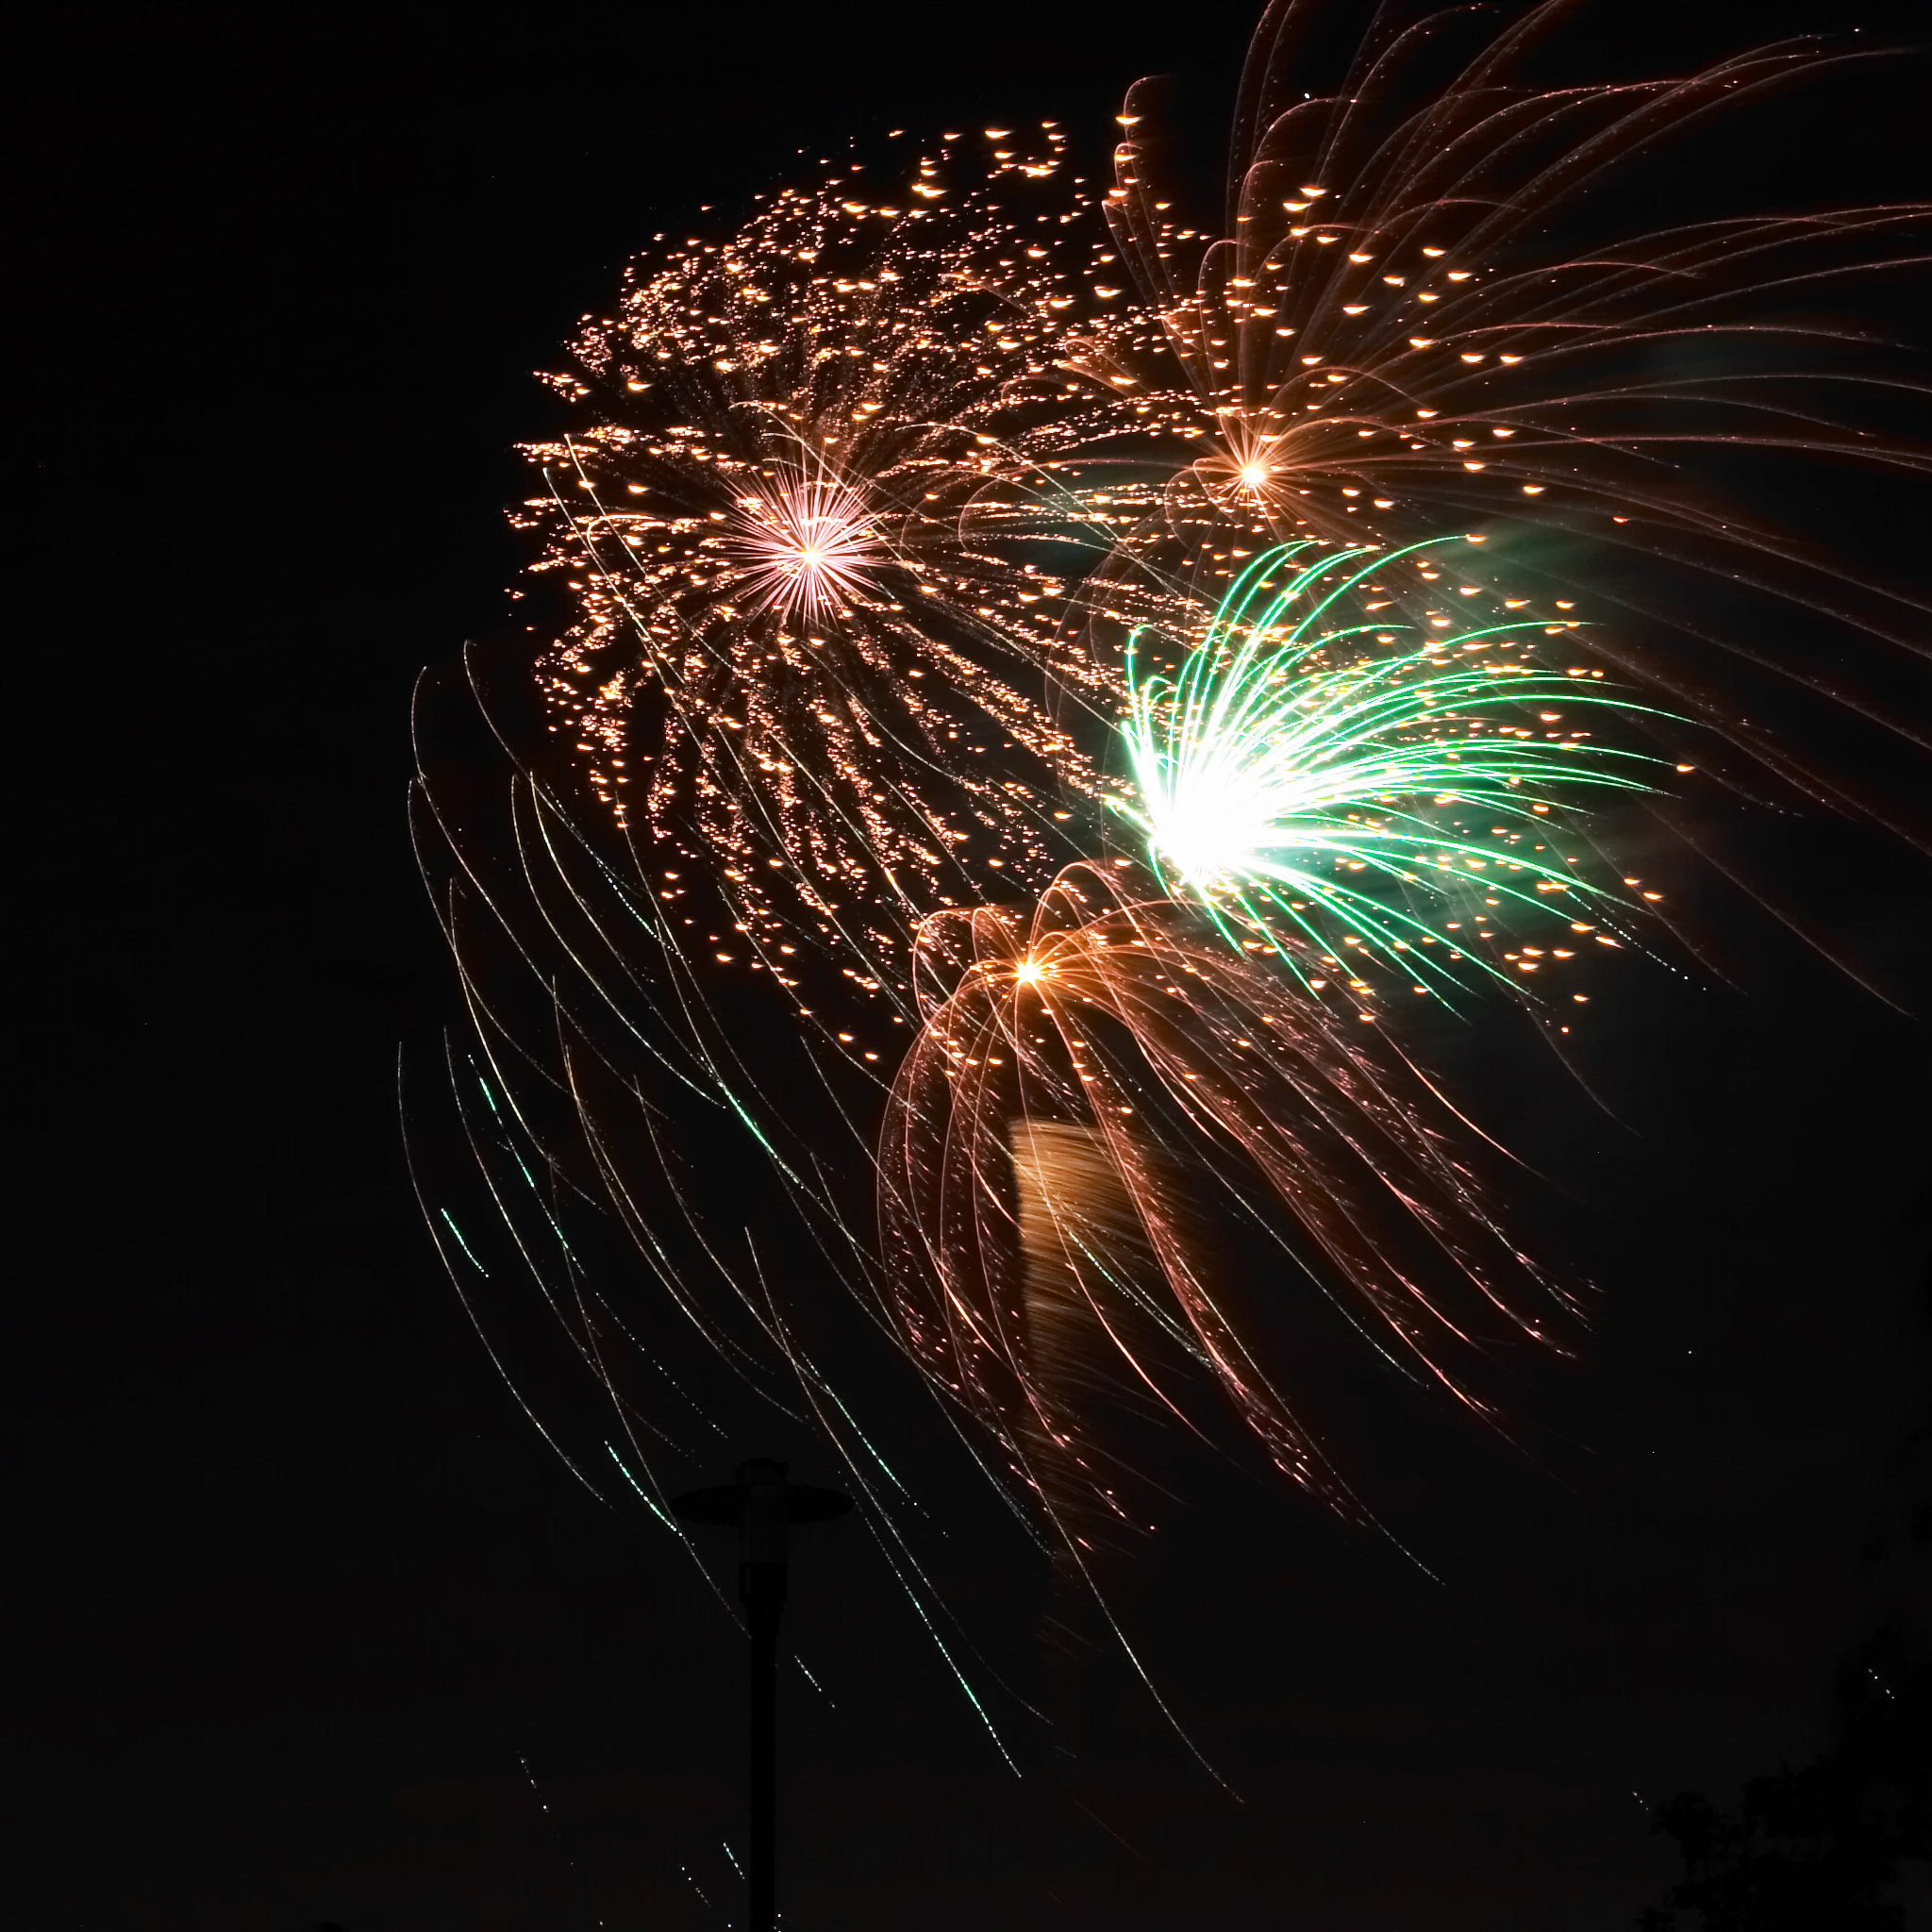 Fireworks and bonfire night fear for pets. © Jason Smith | Dreamstime Stock Photos